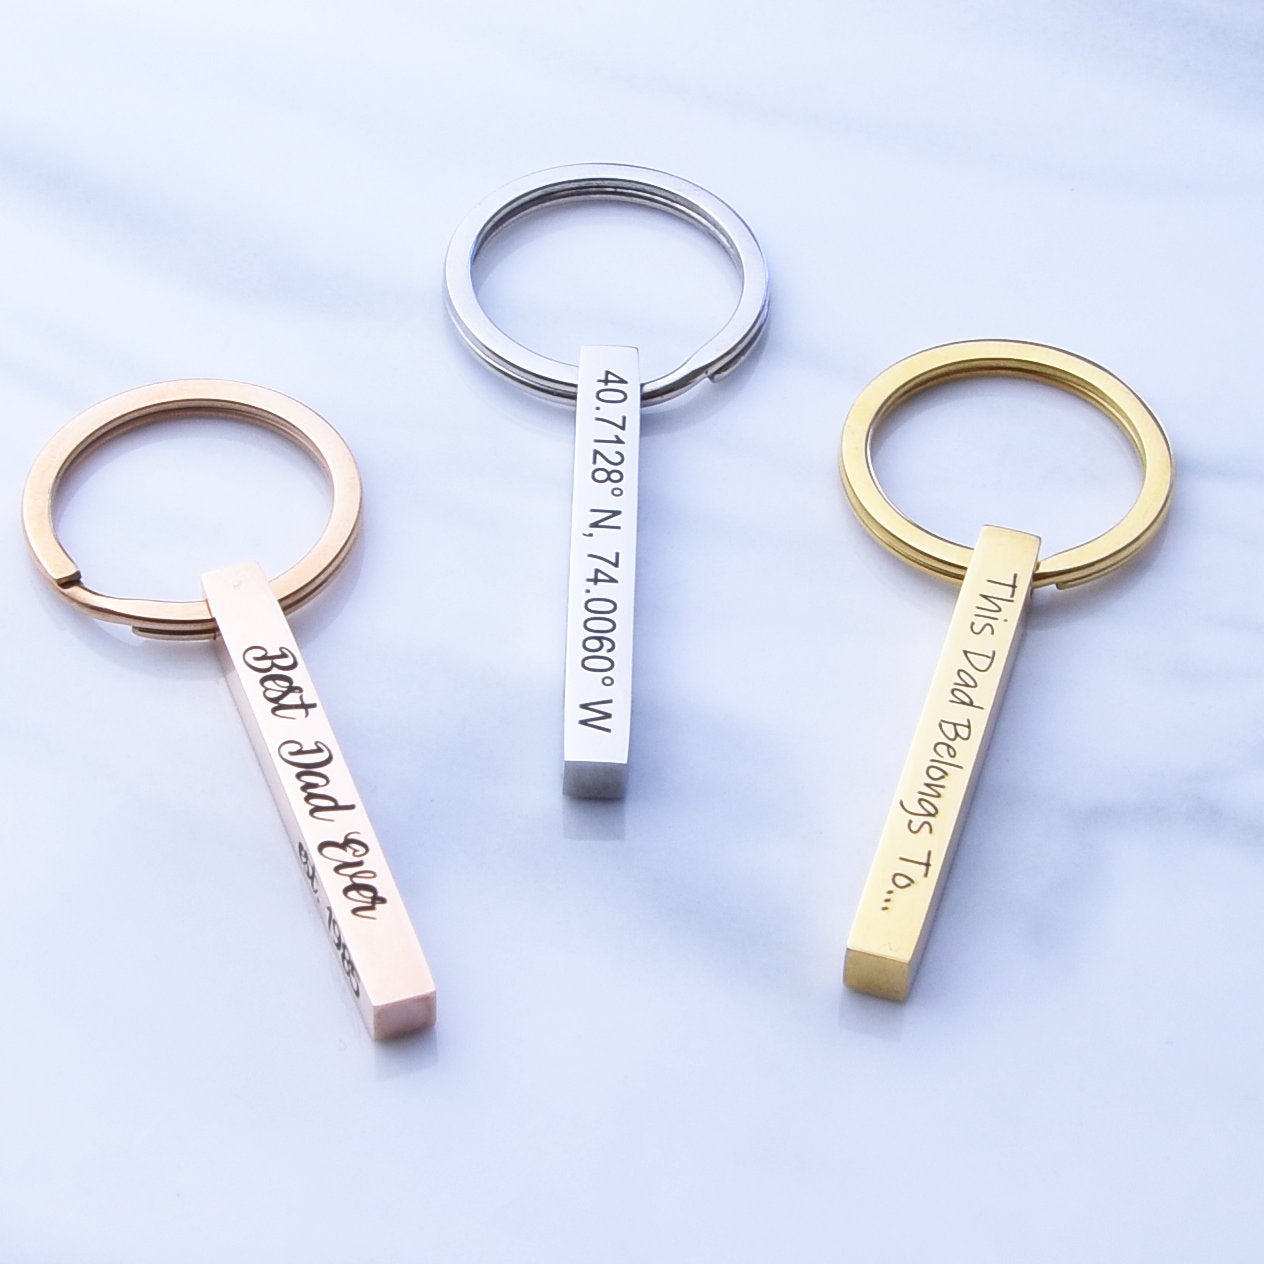 Leather Key Chains Blank 10 Pack - Hot Stamping, Embossing, Laser Engraving  Ready-Promotional, Business gifts | Michaels